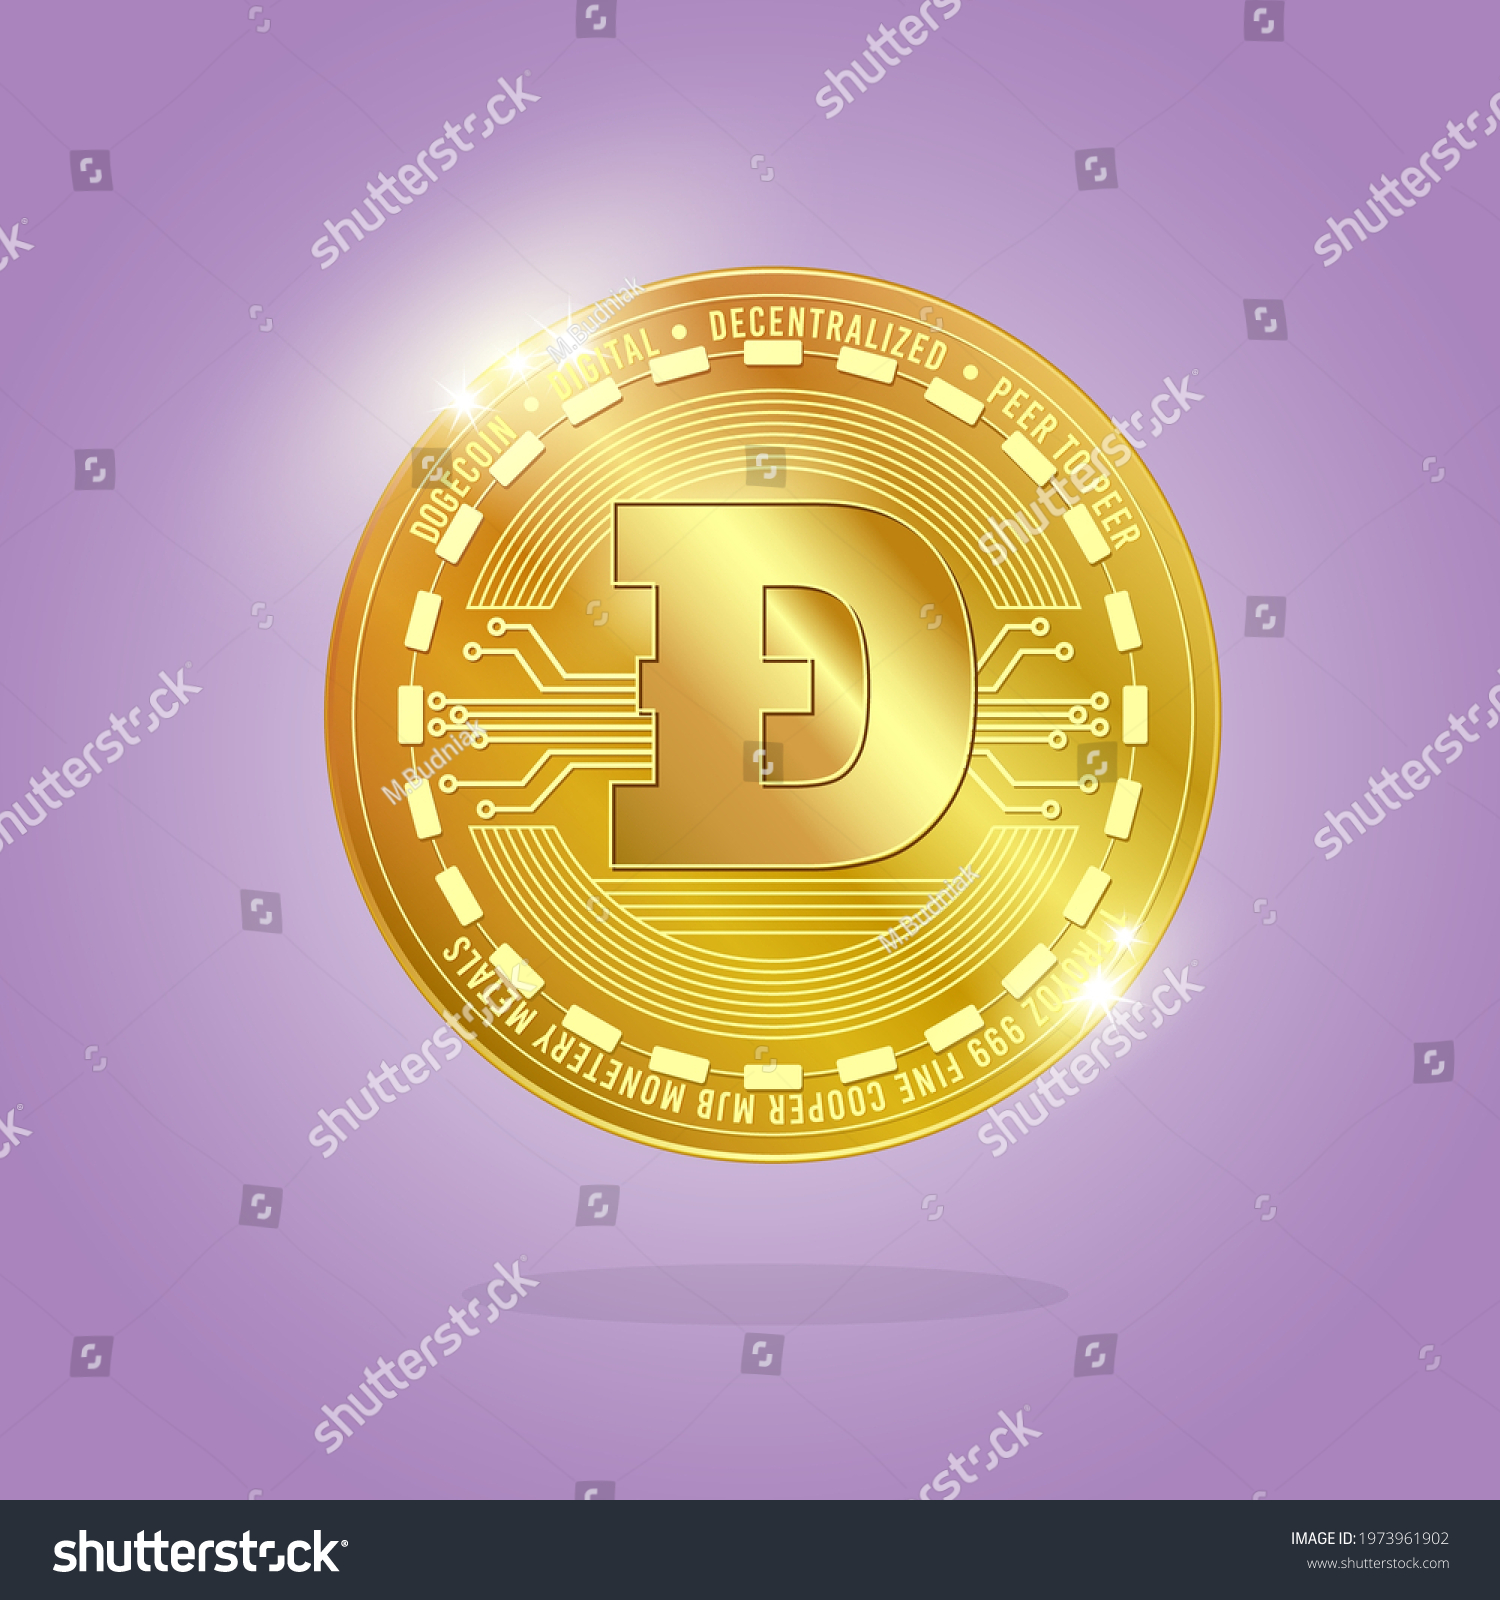 SVG of Dogecoin coin isolated on pink background. Cryptocurrency svg